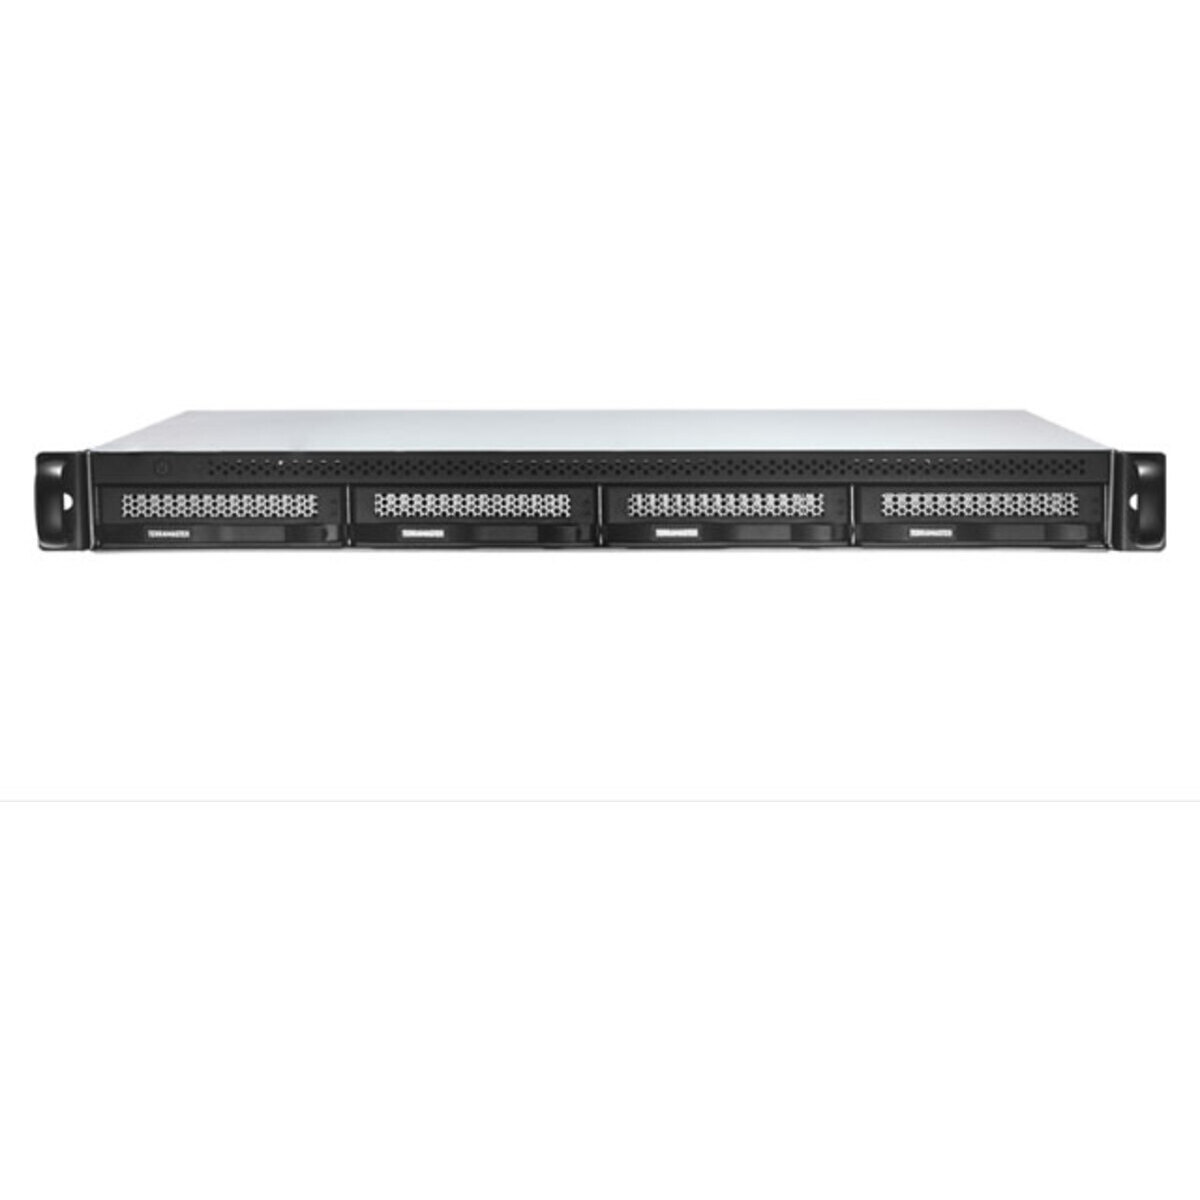 TerraMaster U4-423 48tb 4-Bay RackMount Multimedia / Power User / Business NAS - Network Attached Storage Device 2x24tb Seagate IronWolf Pro ST24000NT002 3.5 7200rpm SATA 6Gb/s HDD NAS Class Drives Installed - Burn-In Tested - FREE RAM UPGRADE U4-423